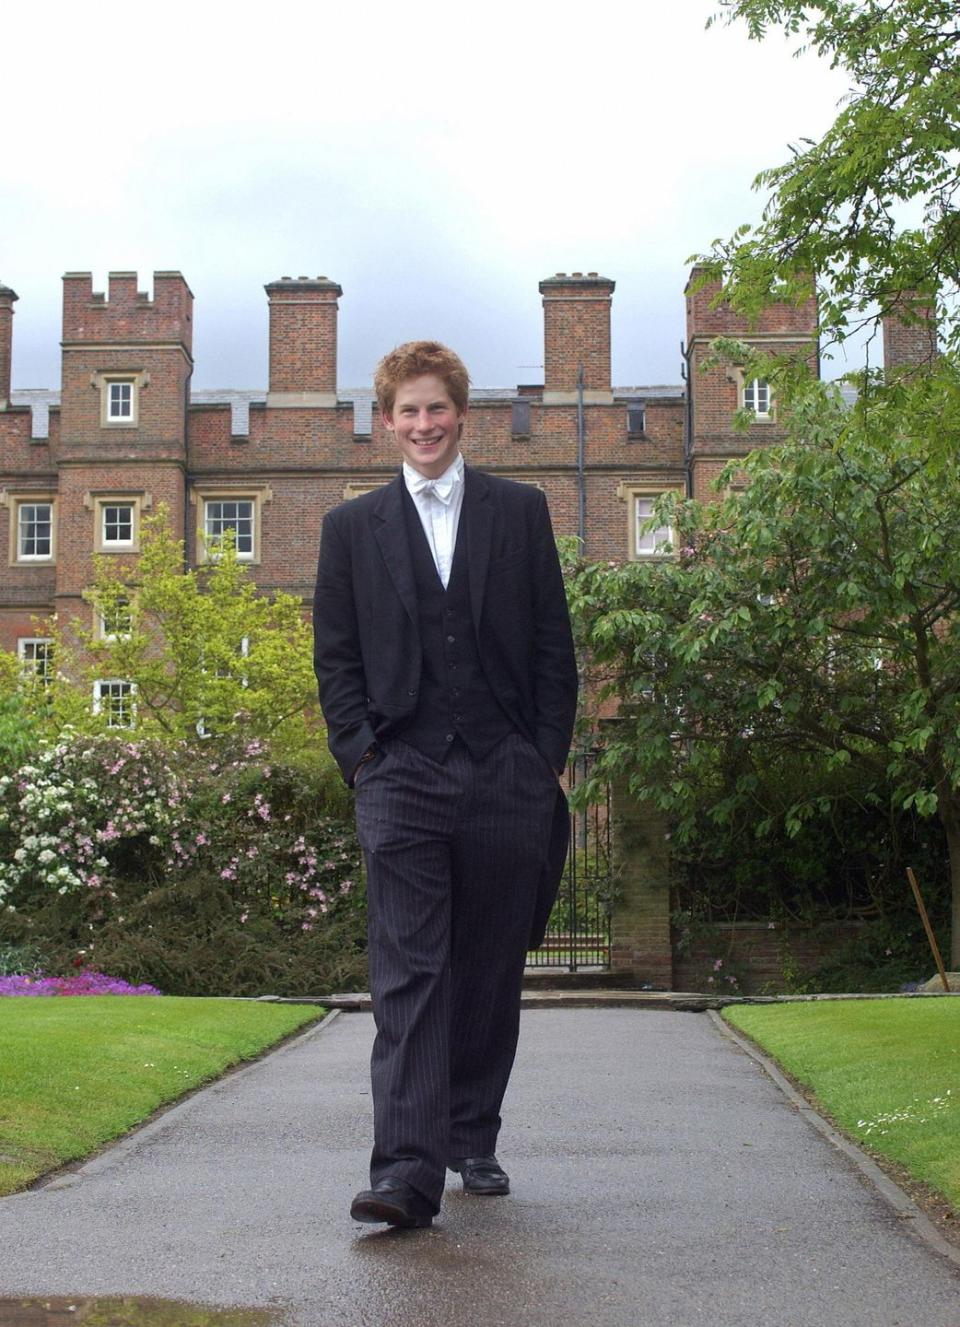 prince harry, the younger son of the pri